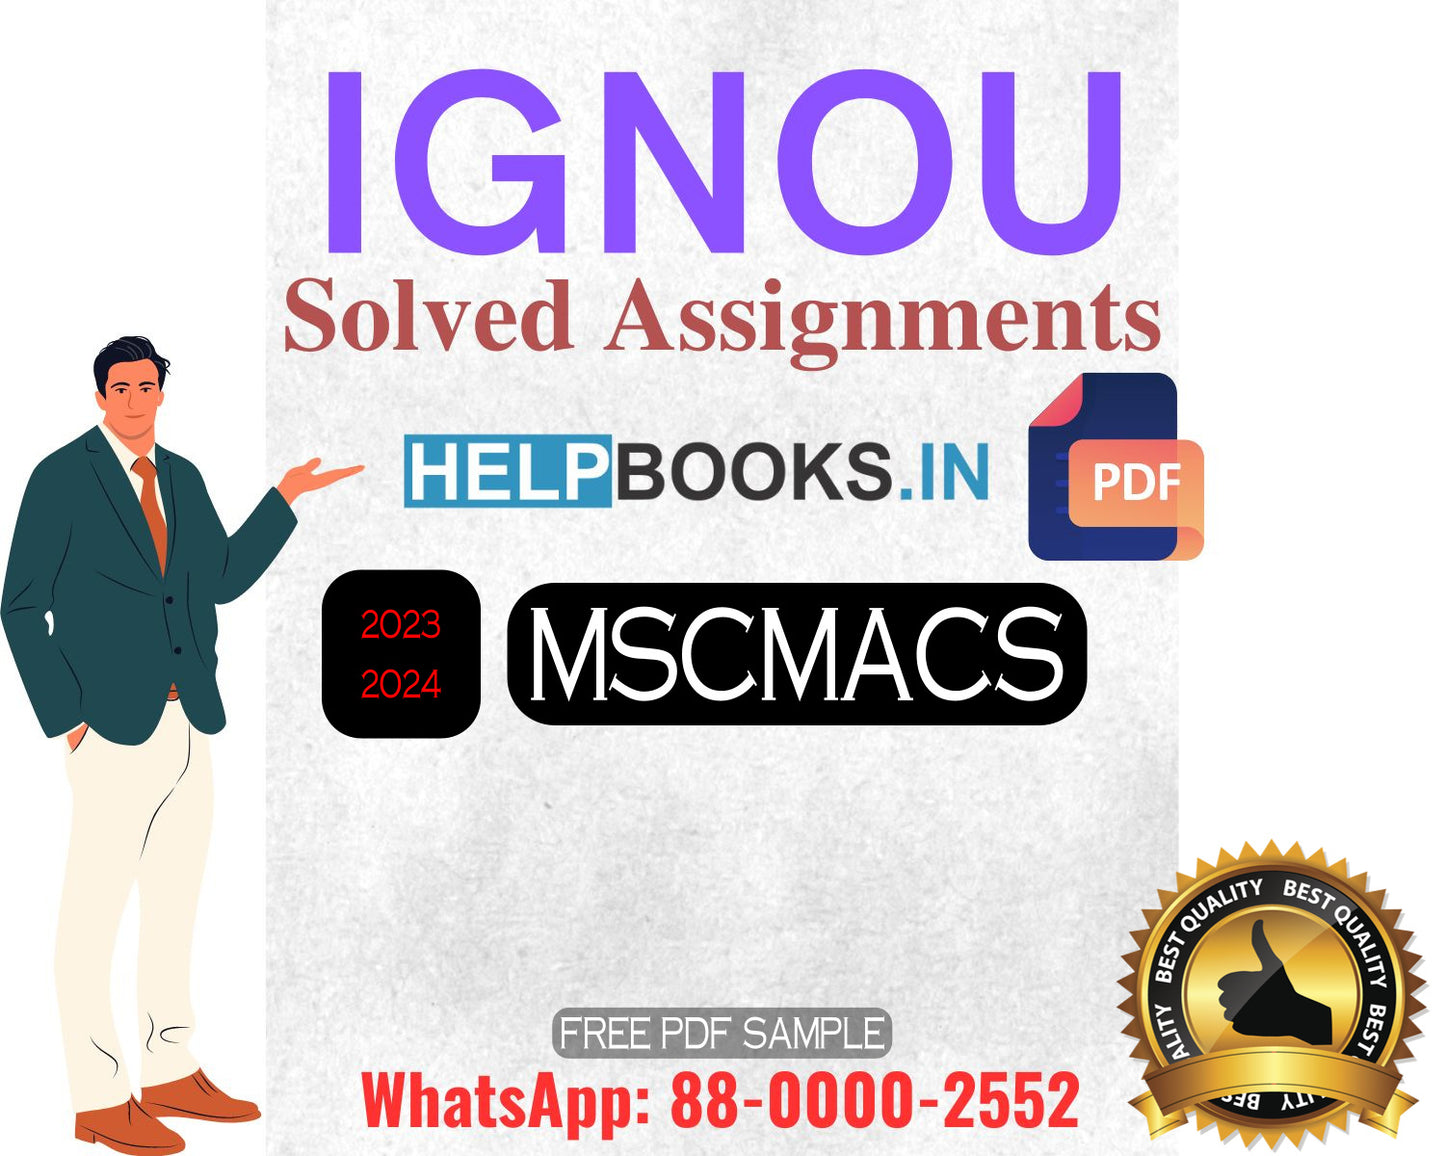 IGNOU Master's Degree Programme Latest IGNOU Solved Assignment 2023-24 : MSCMACS Master of Science Mathematics with Application in Computer Science Solved Assignments